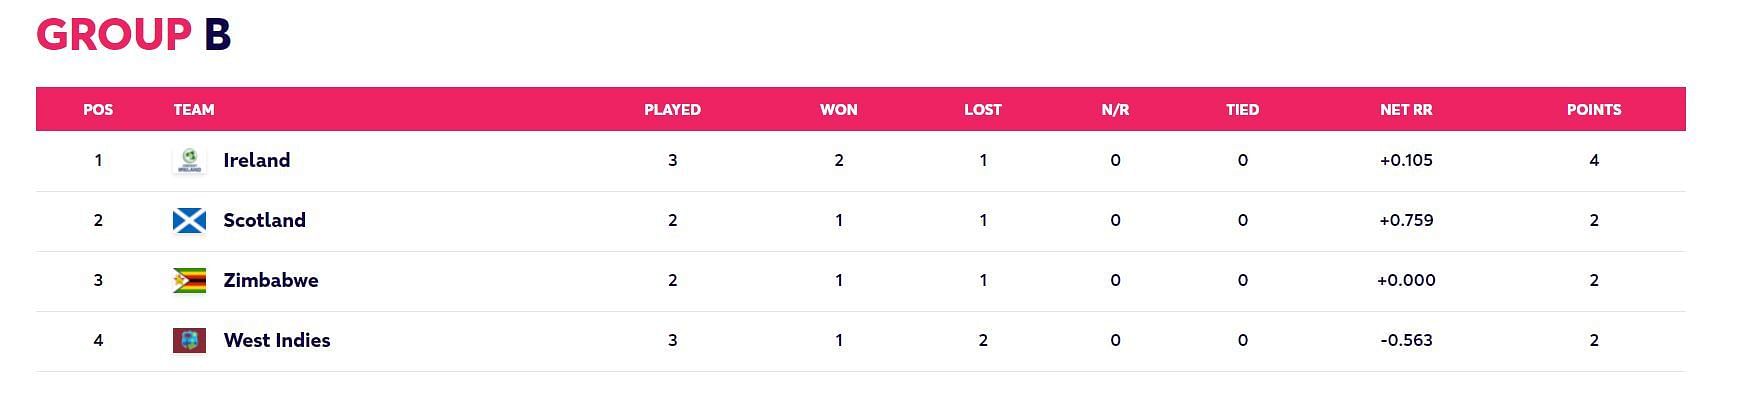 Updated Points Table after Match 11 (Image Courtesy: www.t20worldcup.com)